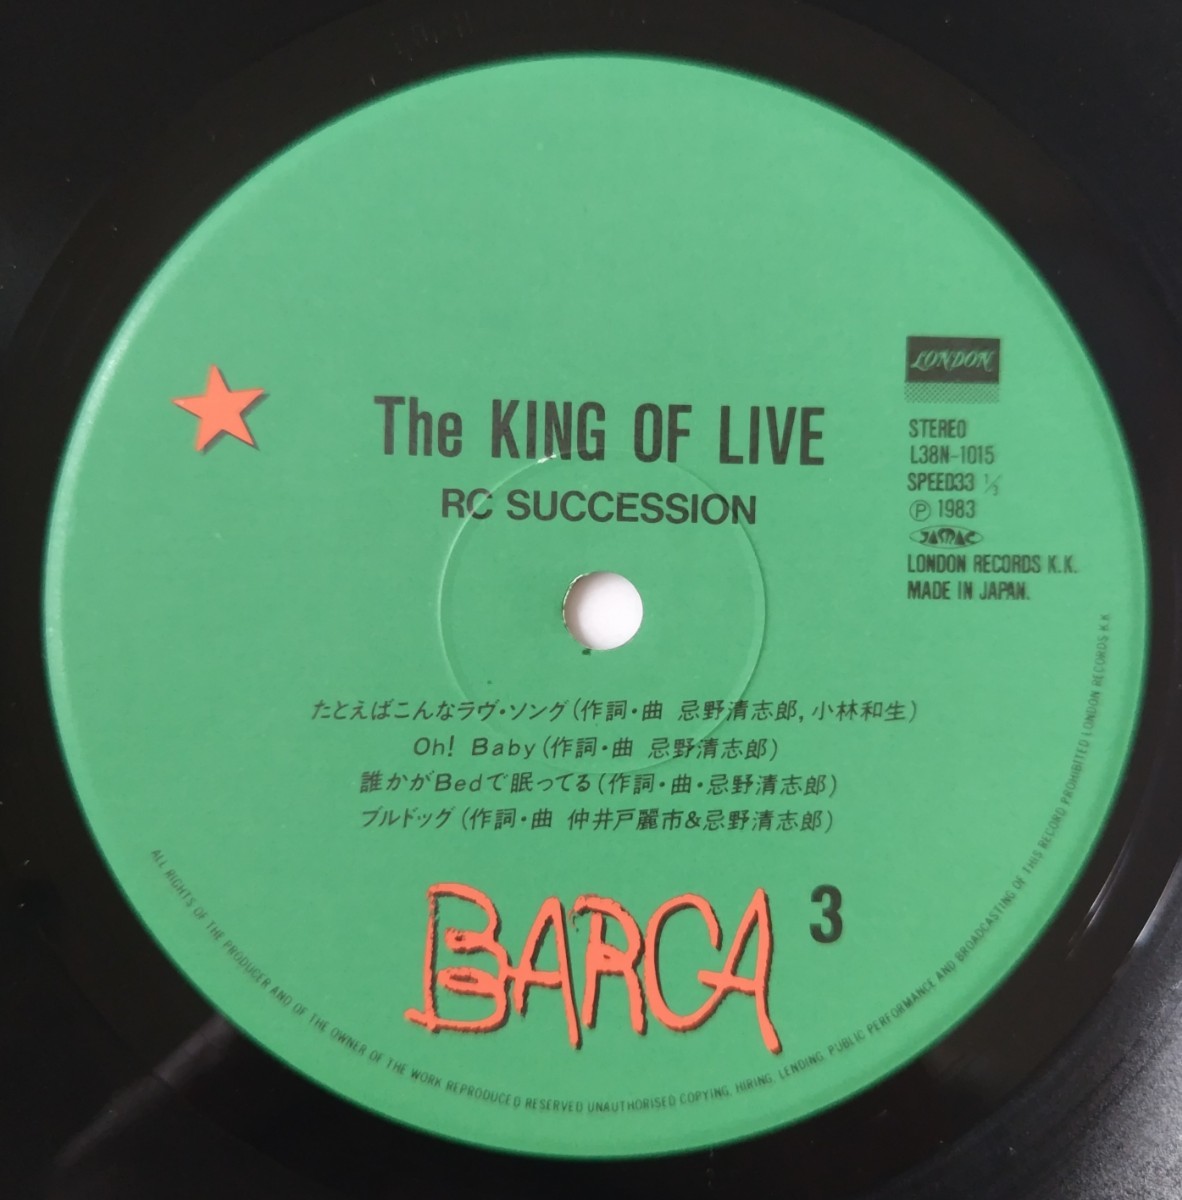 RC Succession The King Of Live/1983年Barca L38N-1014/5 RCサクセション２枚組_画像4